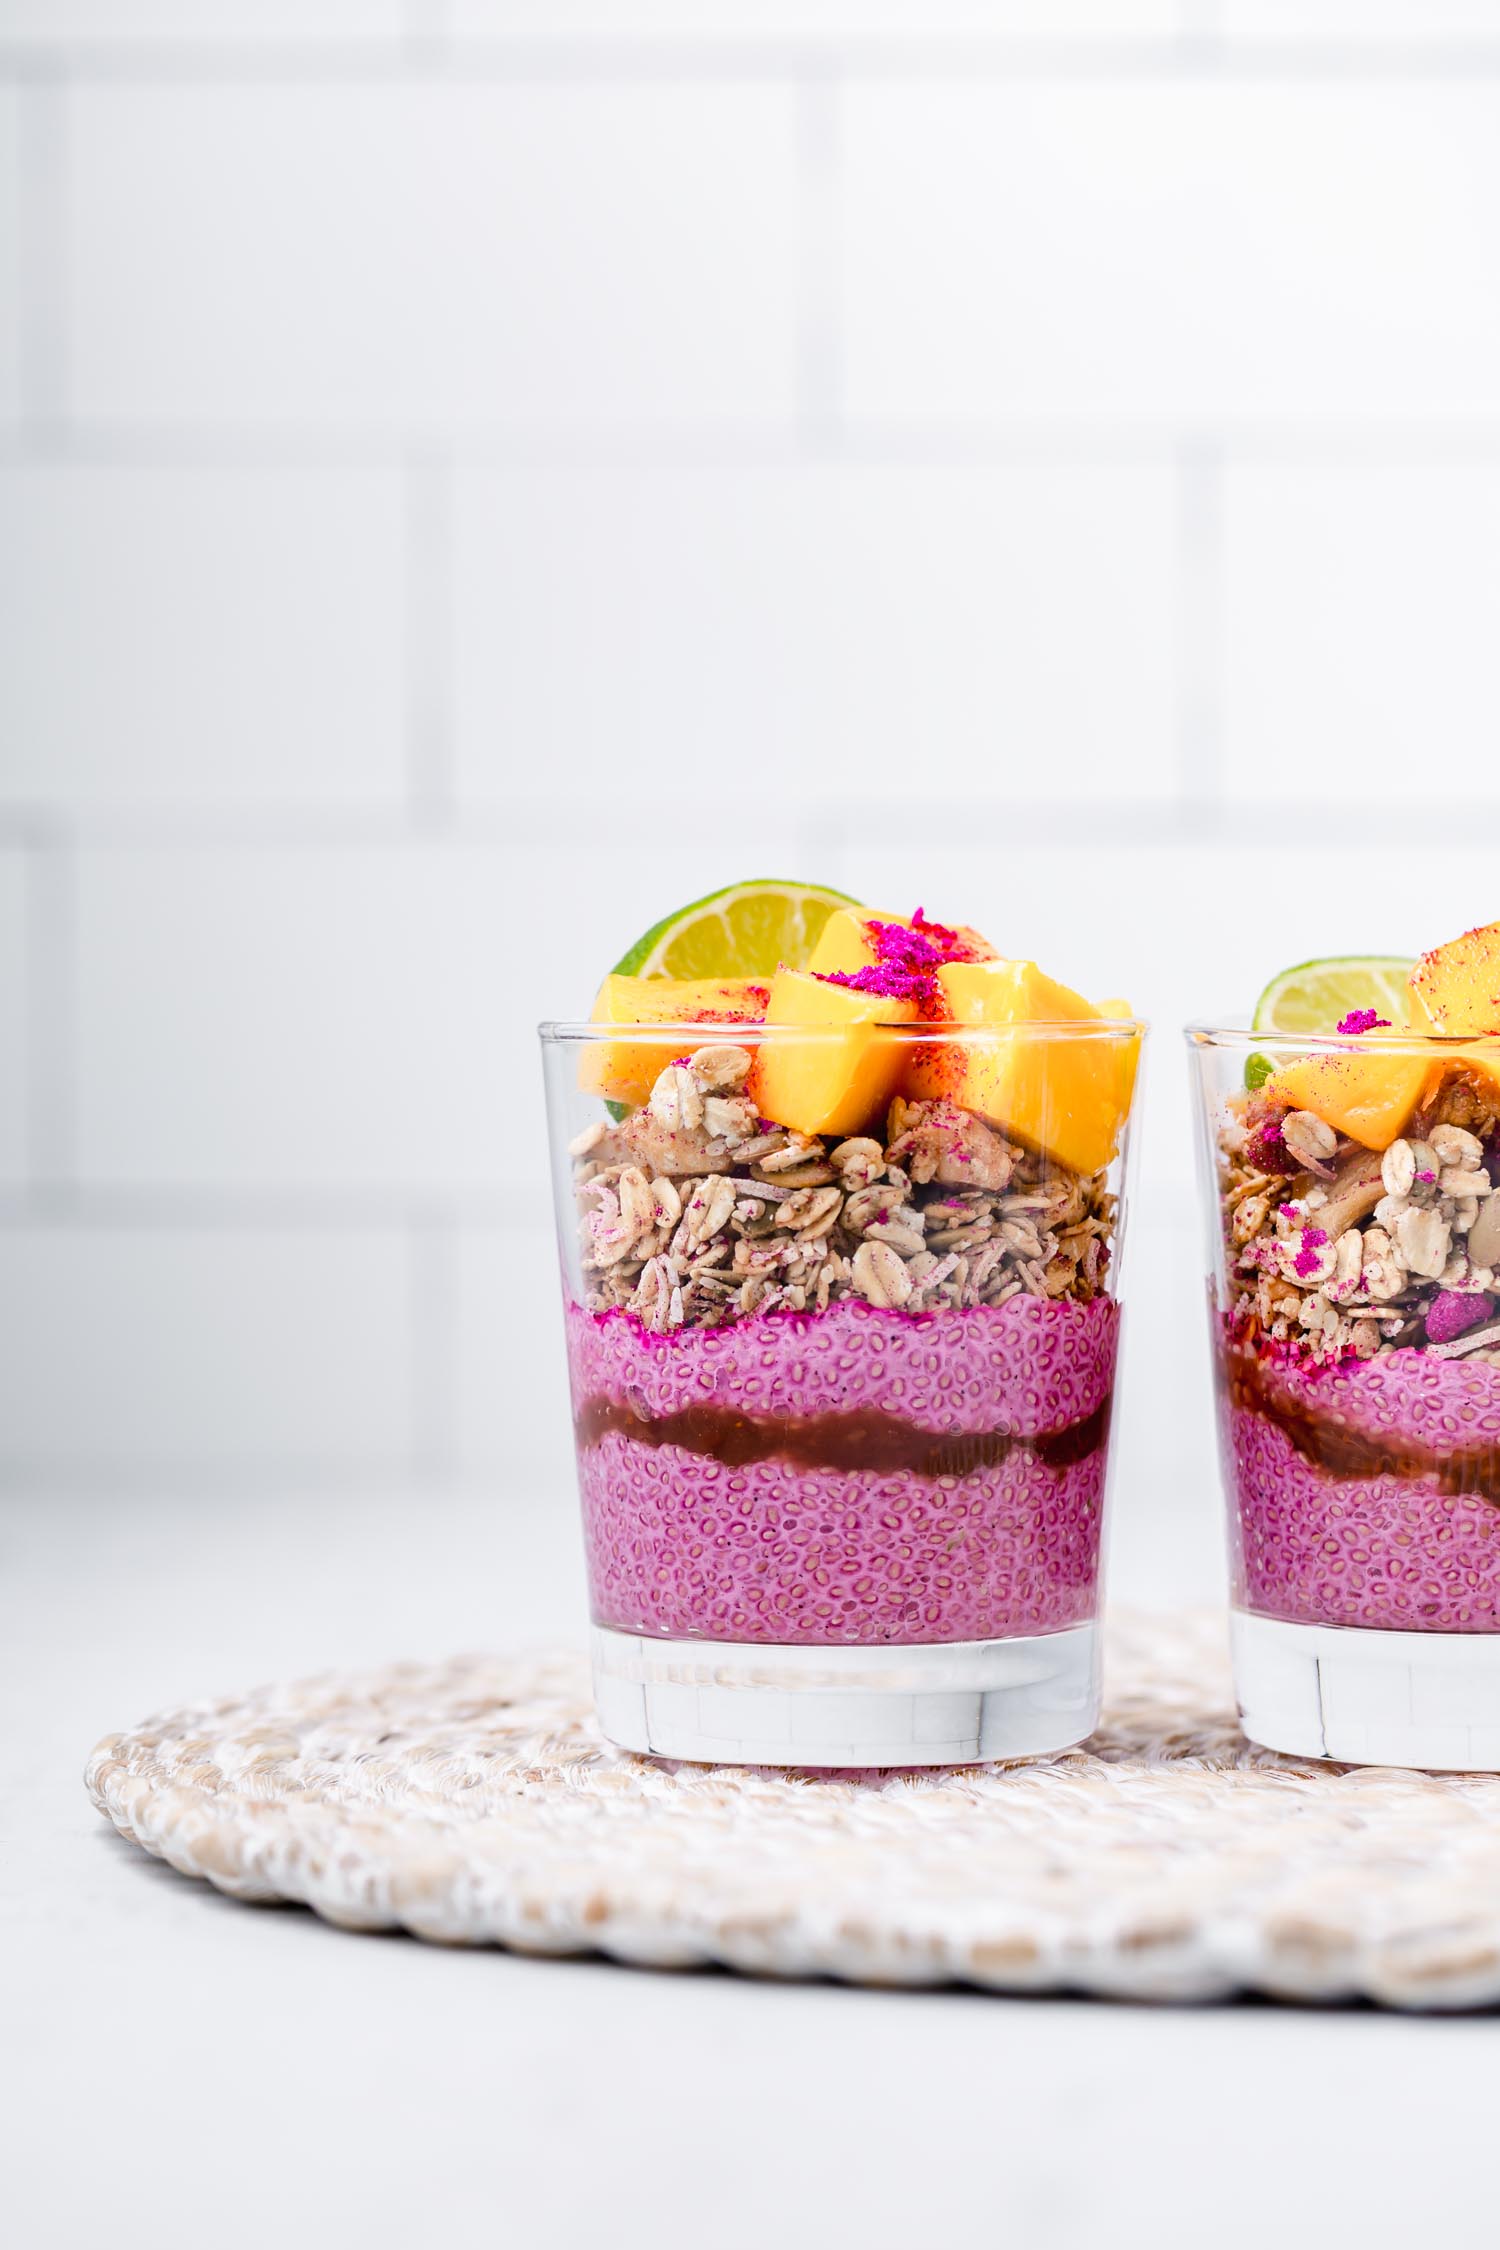 Tropical Dragon Fruit Chia Pudding Breakfast Bowls or Parfaits, so easy to make, colorful, and a real summer treat! #chiapudding #chiapuddingparfait #breakfastbowl #breakfast #vegan #veganbreakfast #veganrecipe #tropicalrecipe #tropicalveganrecipe #summerrecipe #dragonfruit #pitaya #tropicalbowl